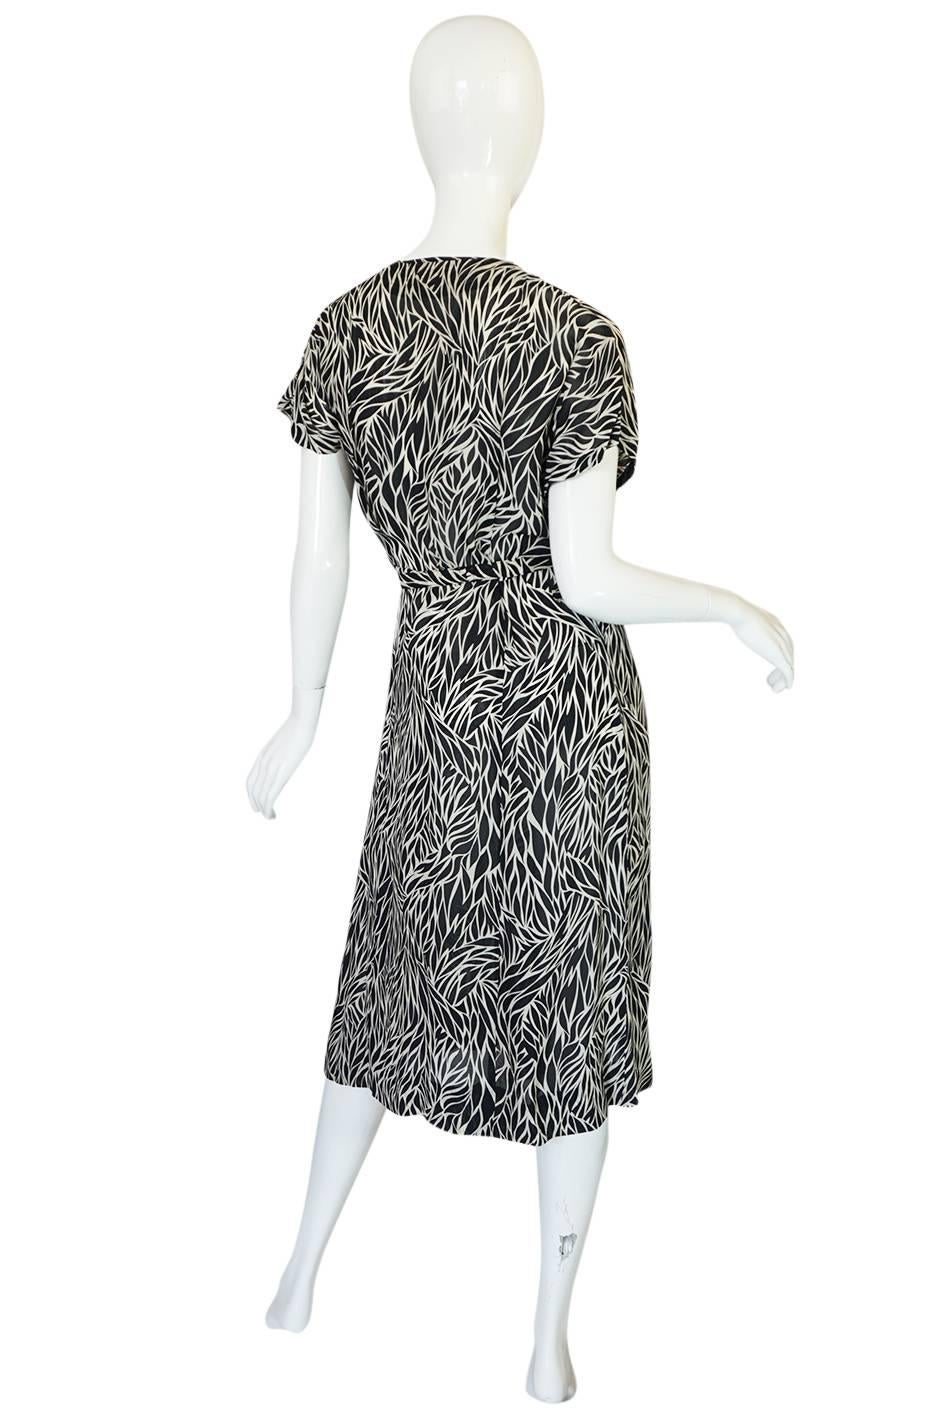 This wonderful little dress is so light and easy to wear. It just slips over the head, falls into place and you belt it at the waist for shape. The fabric is a pretty silk chiffon with a graphic black and white print over its surface. The bodice is